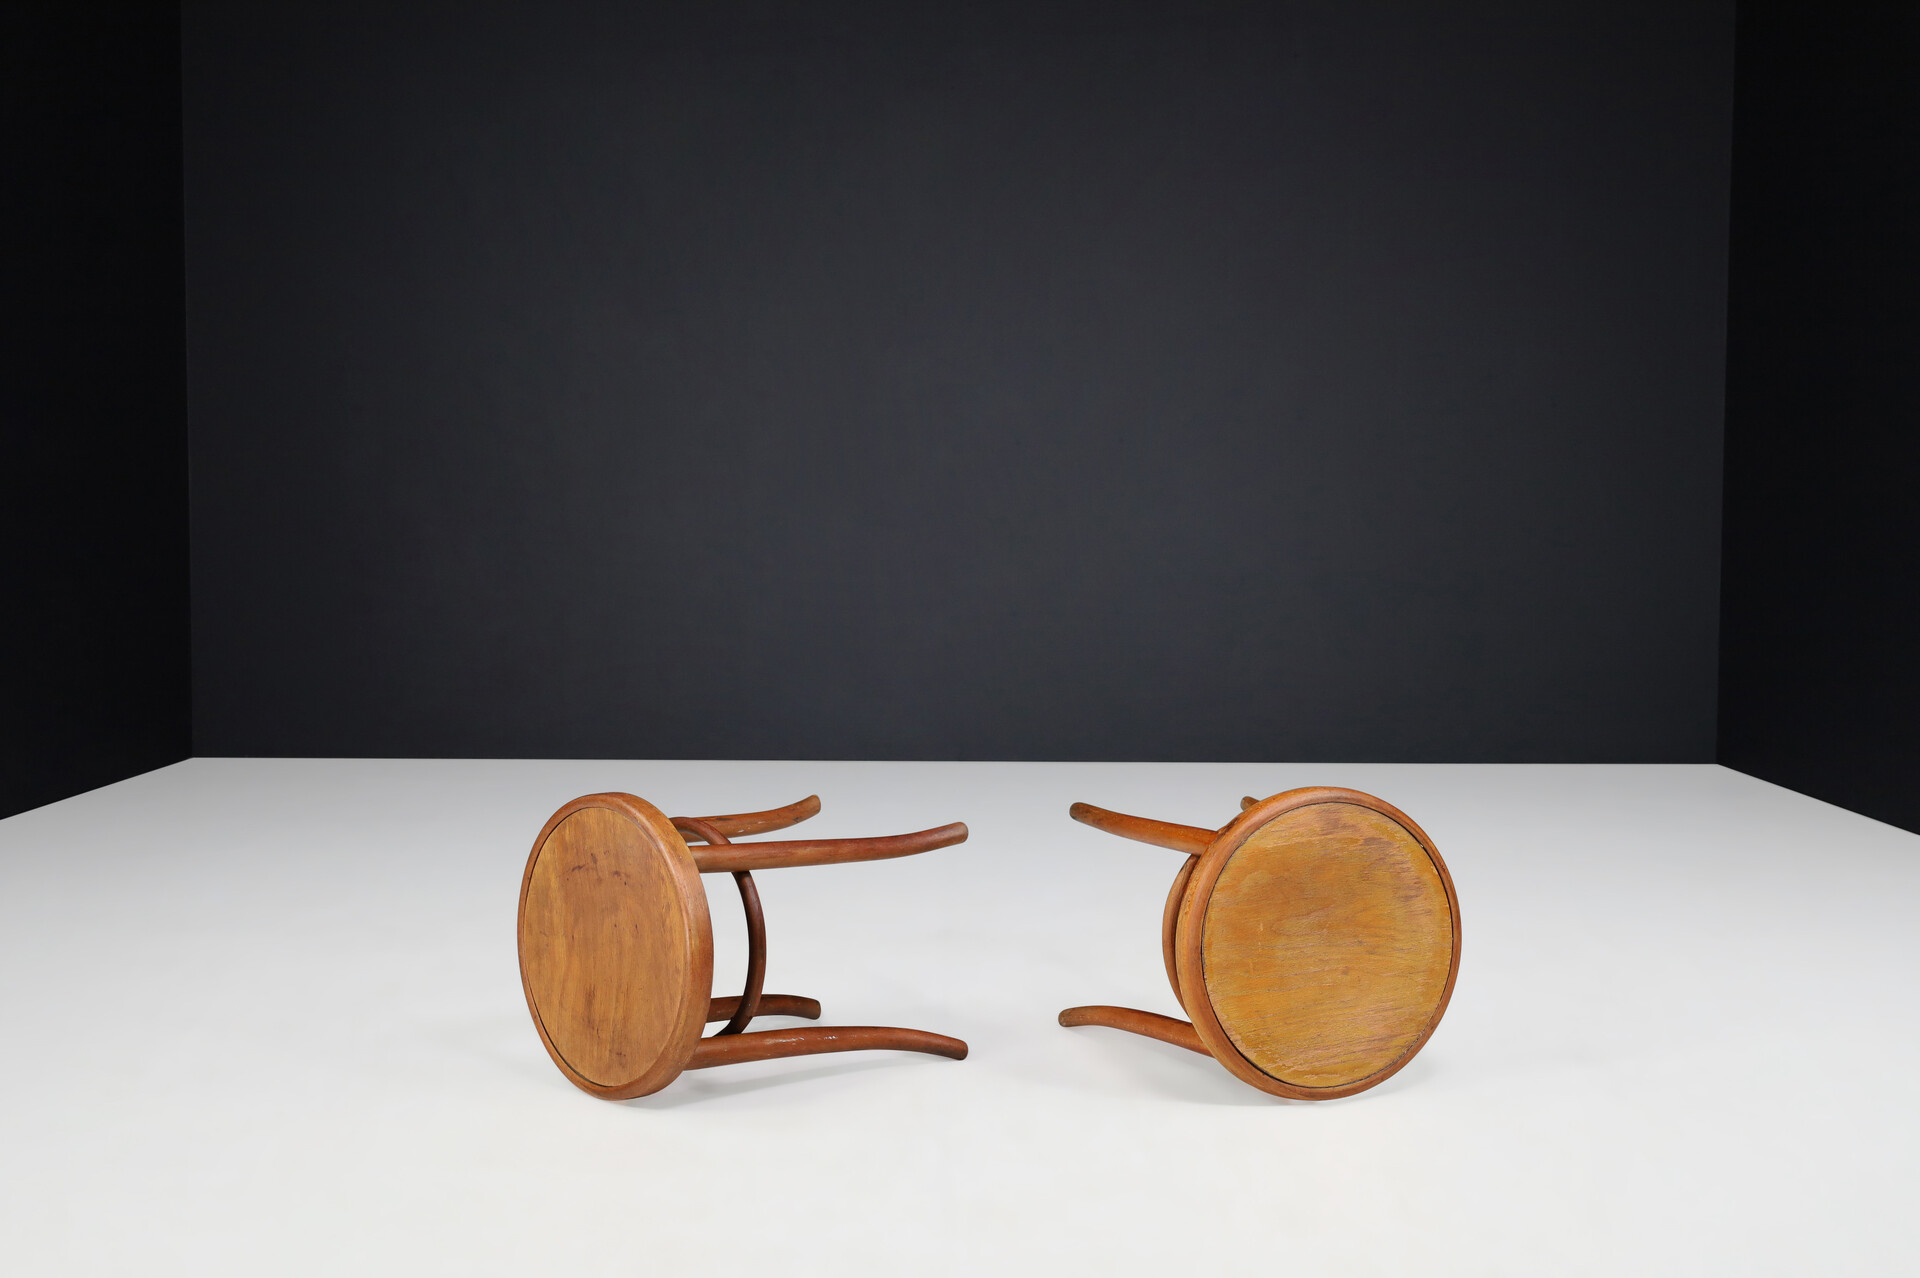 Antique Bentwood and plywood tabourets By Thonet, Austria 1910s 20th century